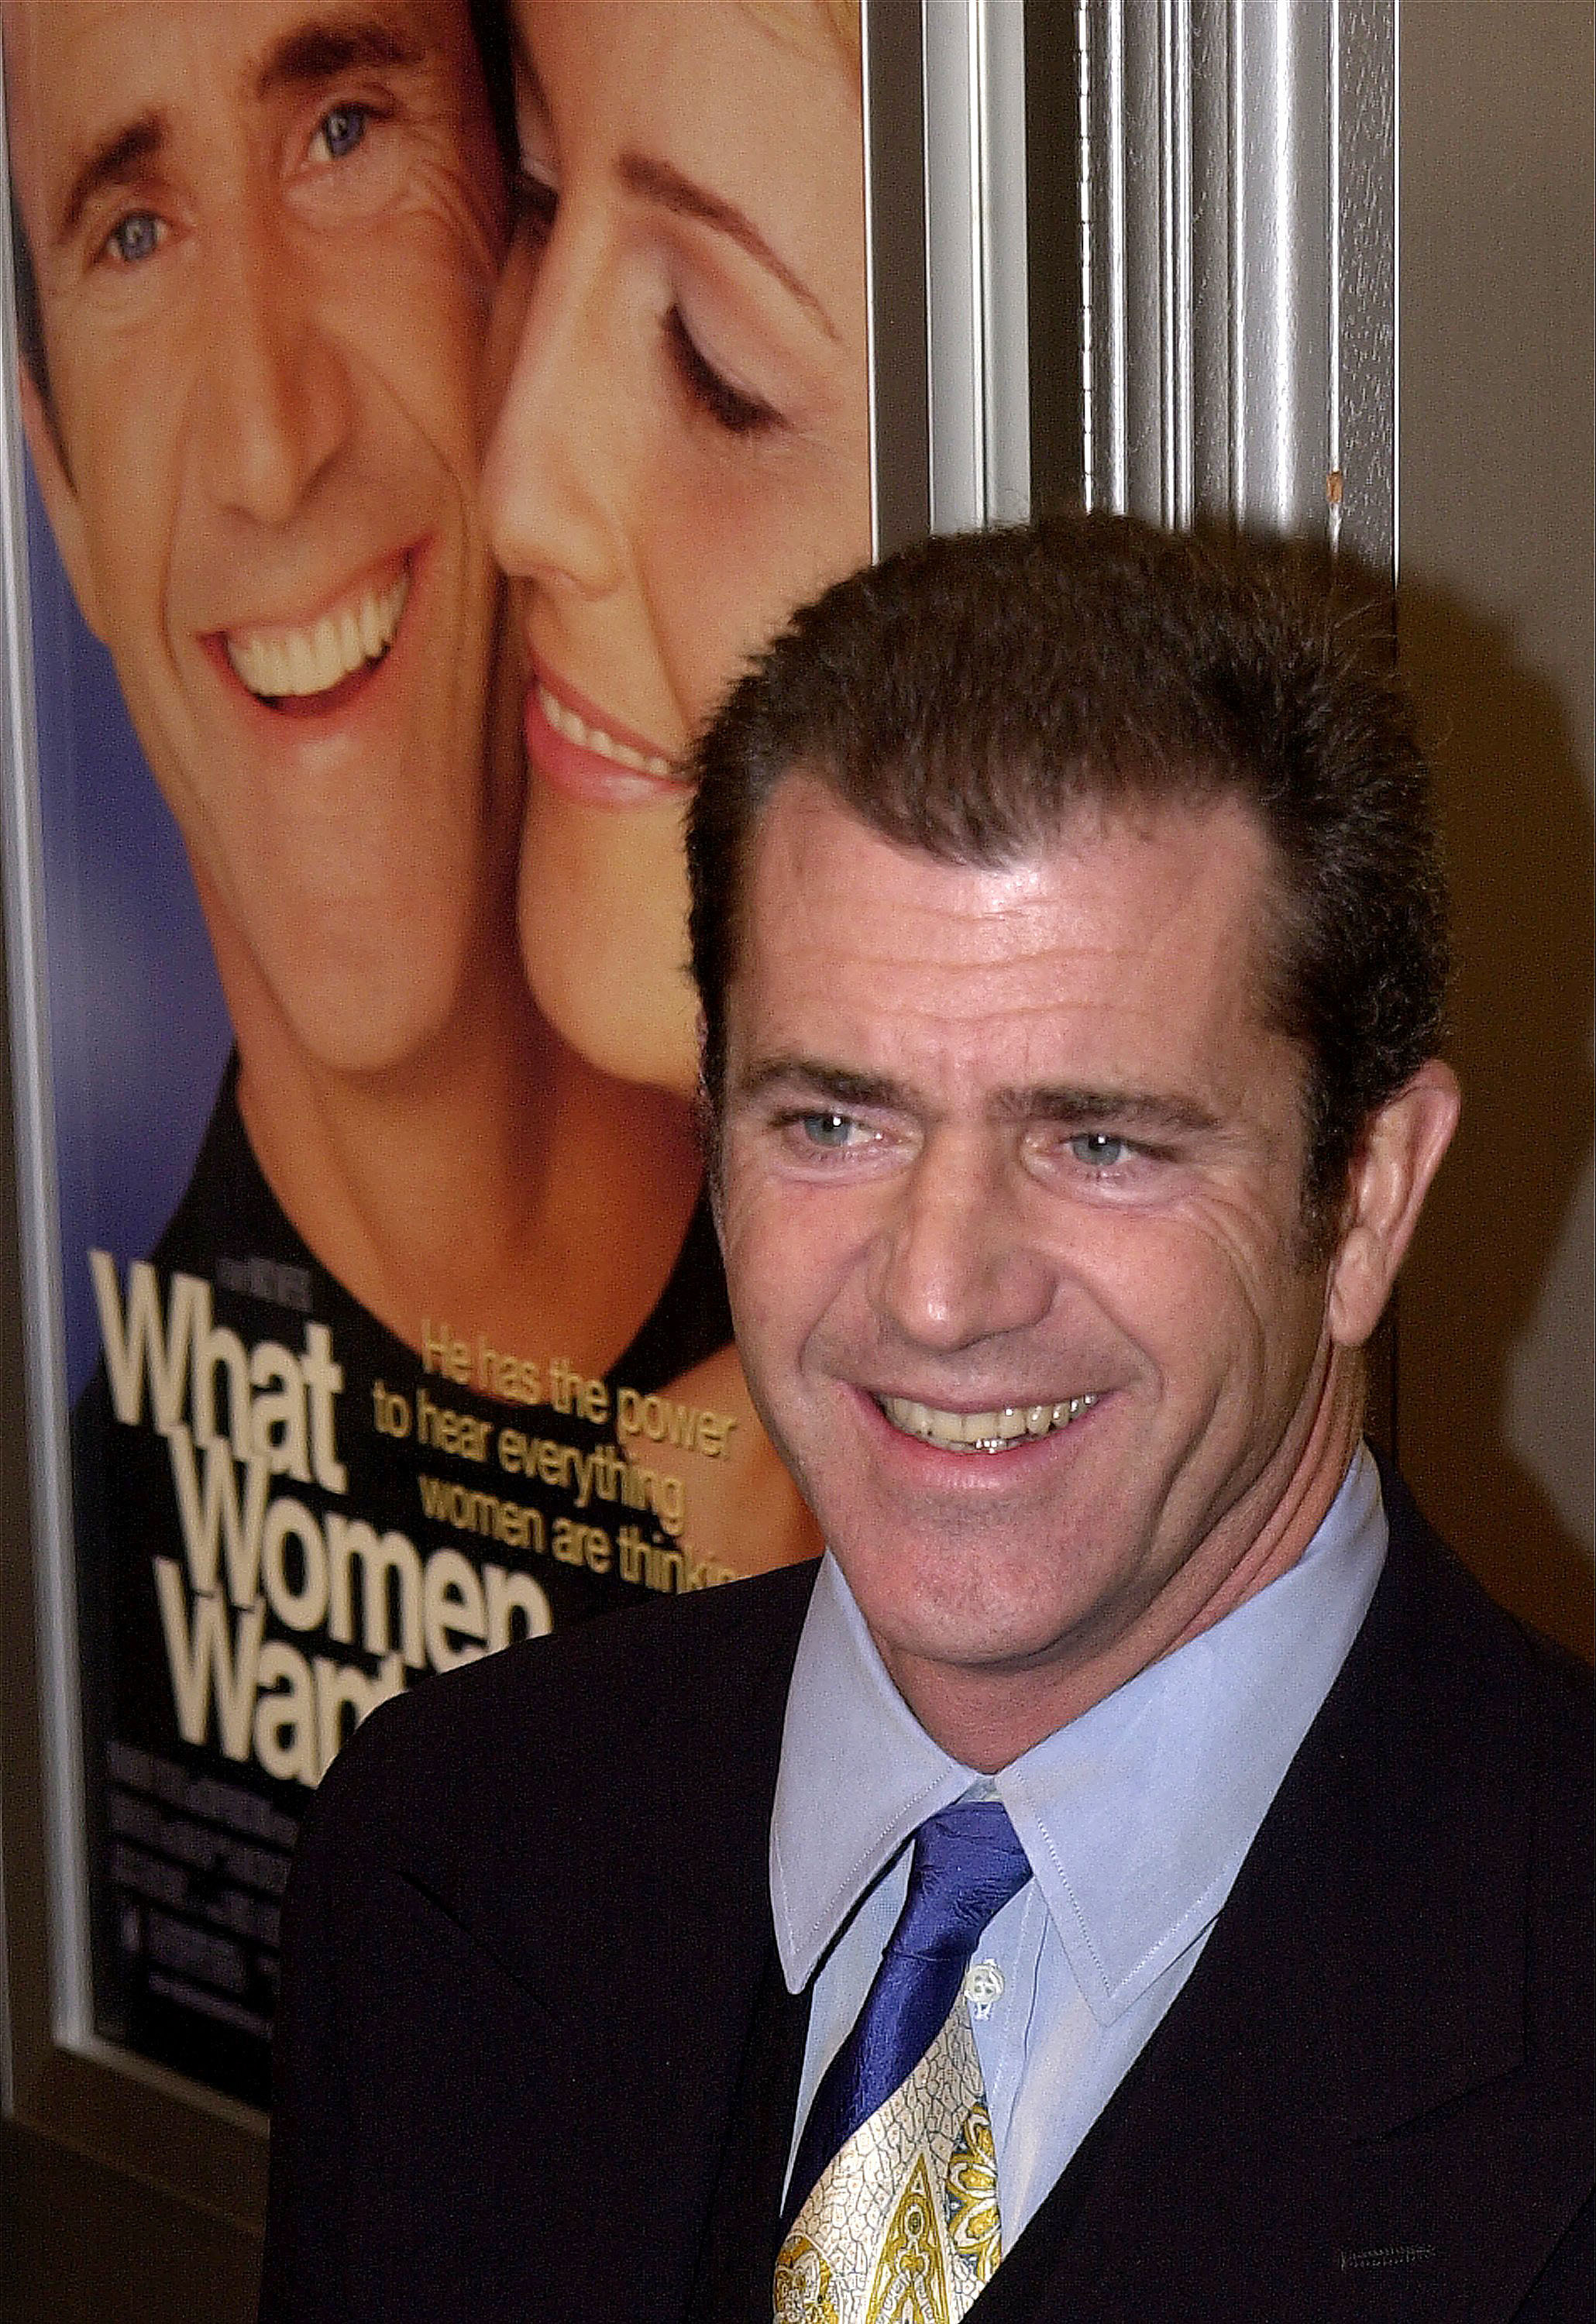 Mel Gibson in front of What Women Want movie poster